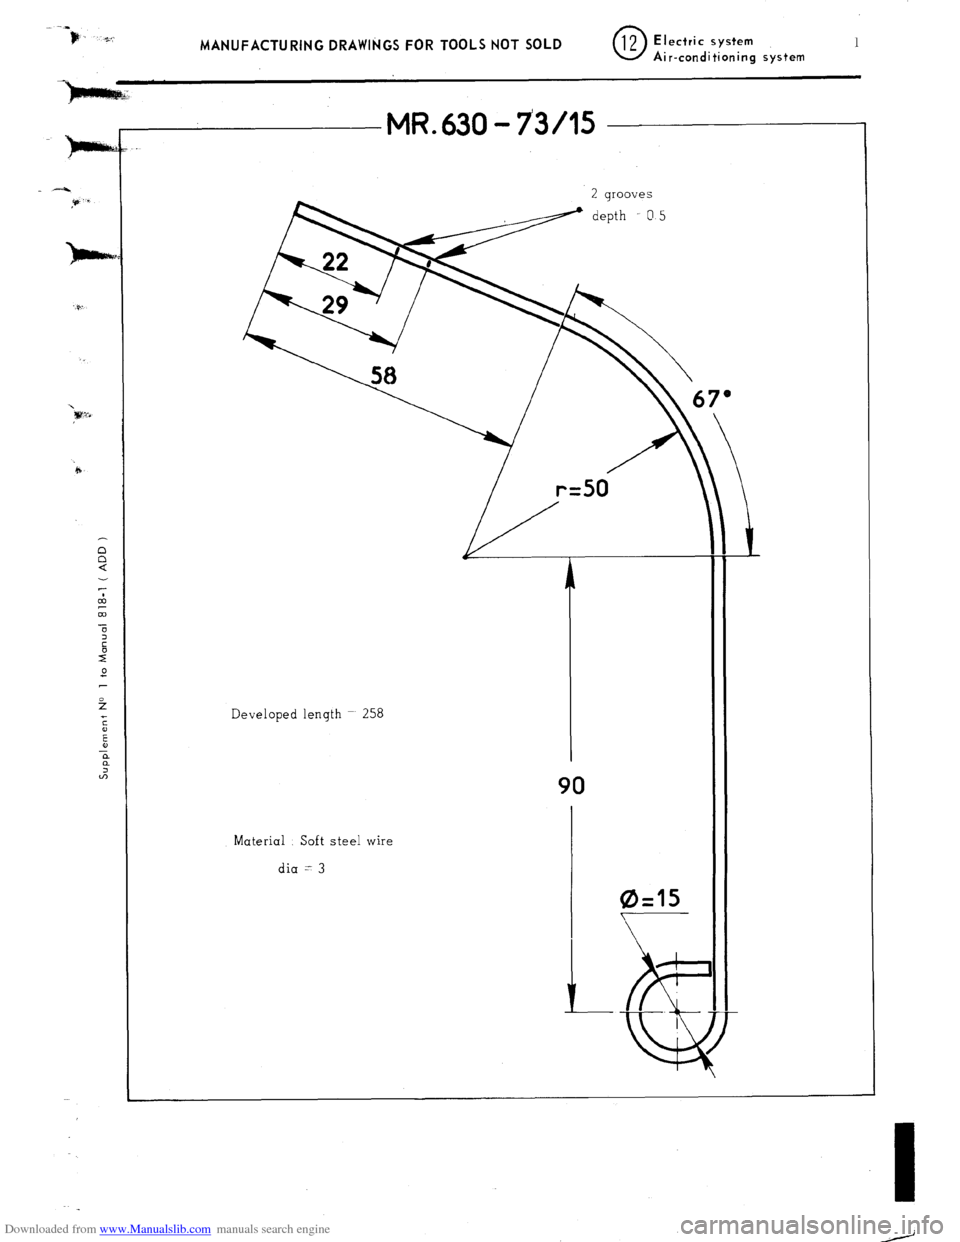 Citroen CX 1985 1.G Owners Guide Downloaded from www.Manualslib.com manuals search engine MANUFACTURING DRAWINGS FOR TOOLS NOT SOLD 0 12 Electric system 1 Air-conditioning system n 
n 
a 
MR. 630 - 7305 
Developed length ~ 258 
Mater